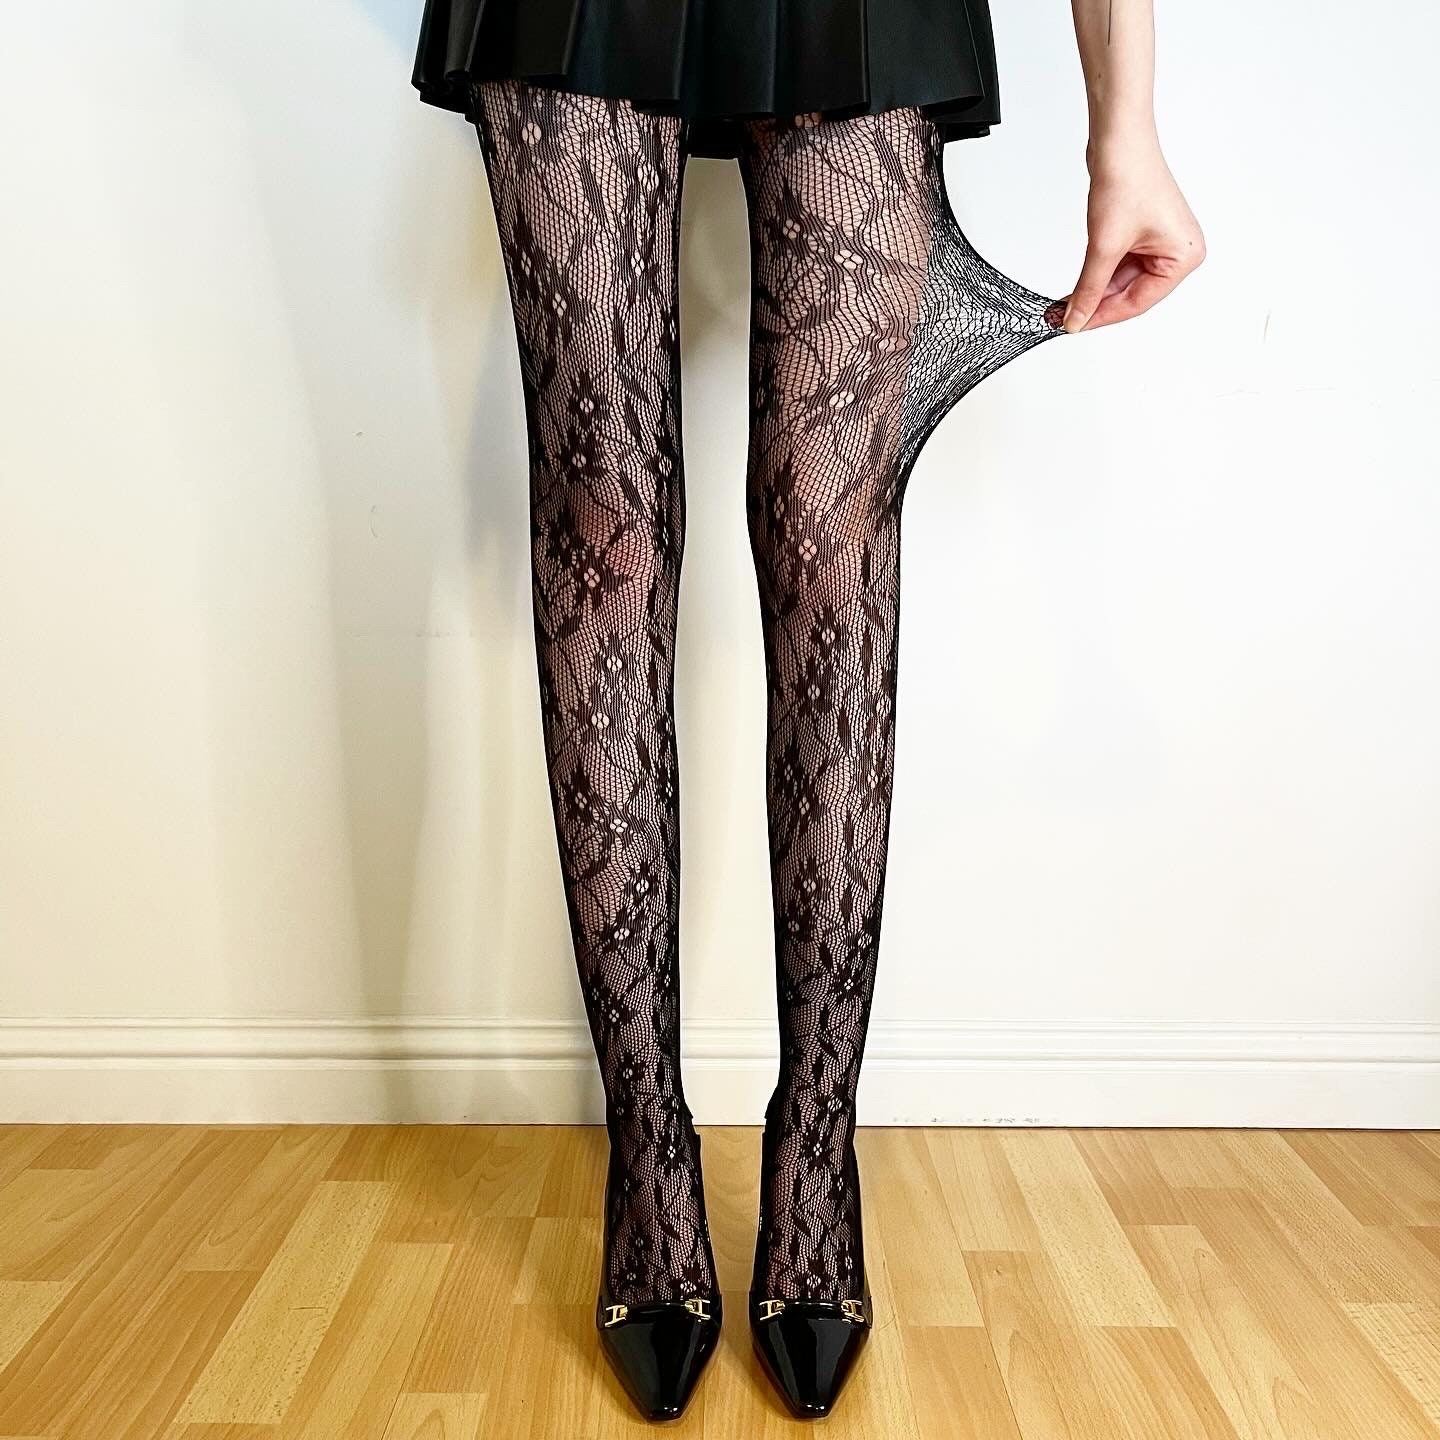 Lace Tights Black